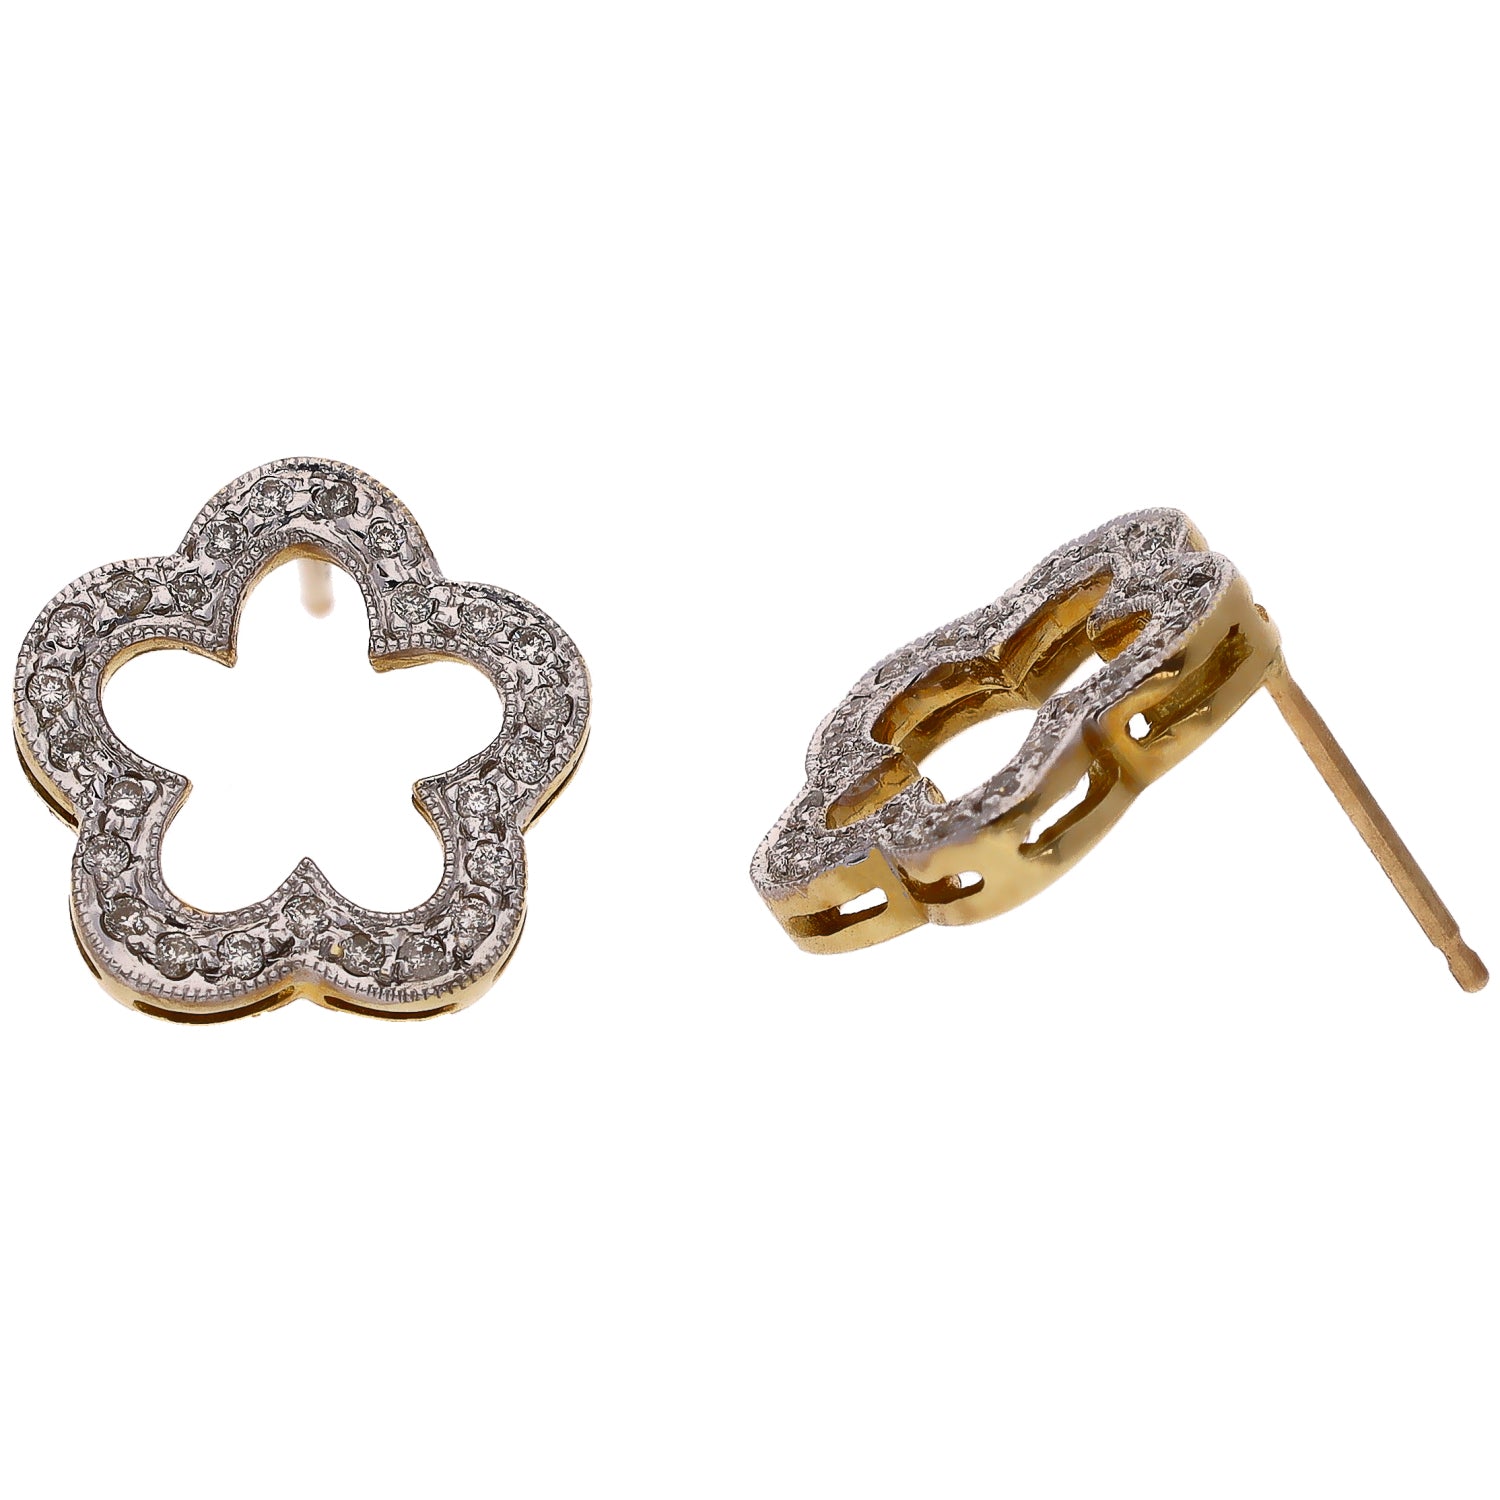 14K White and Yellow Gold Diamond Flower Shaped Earrings